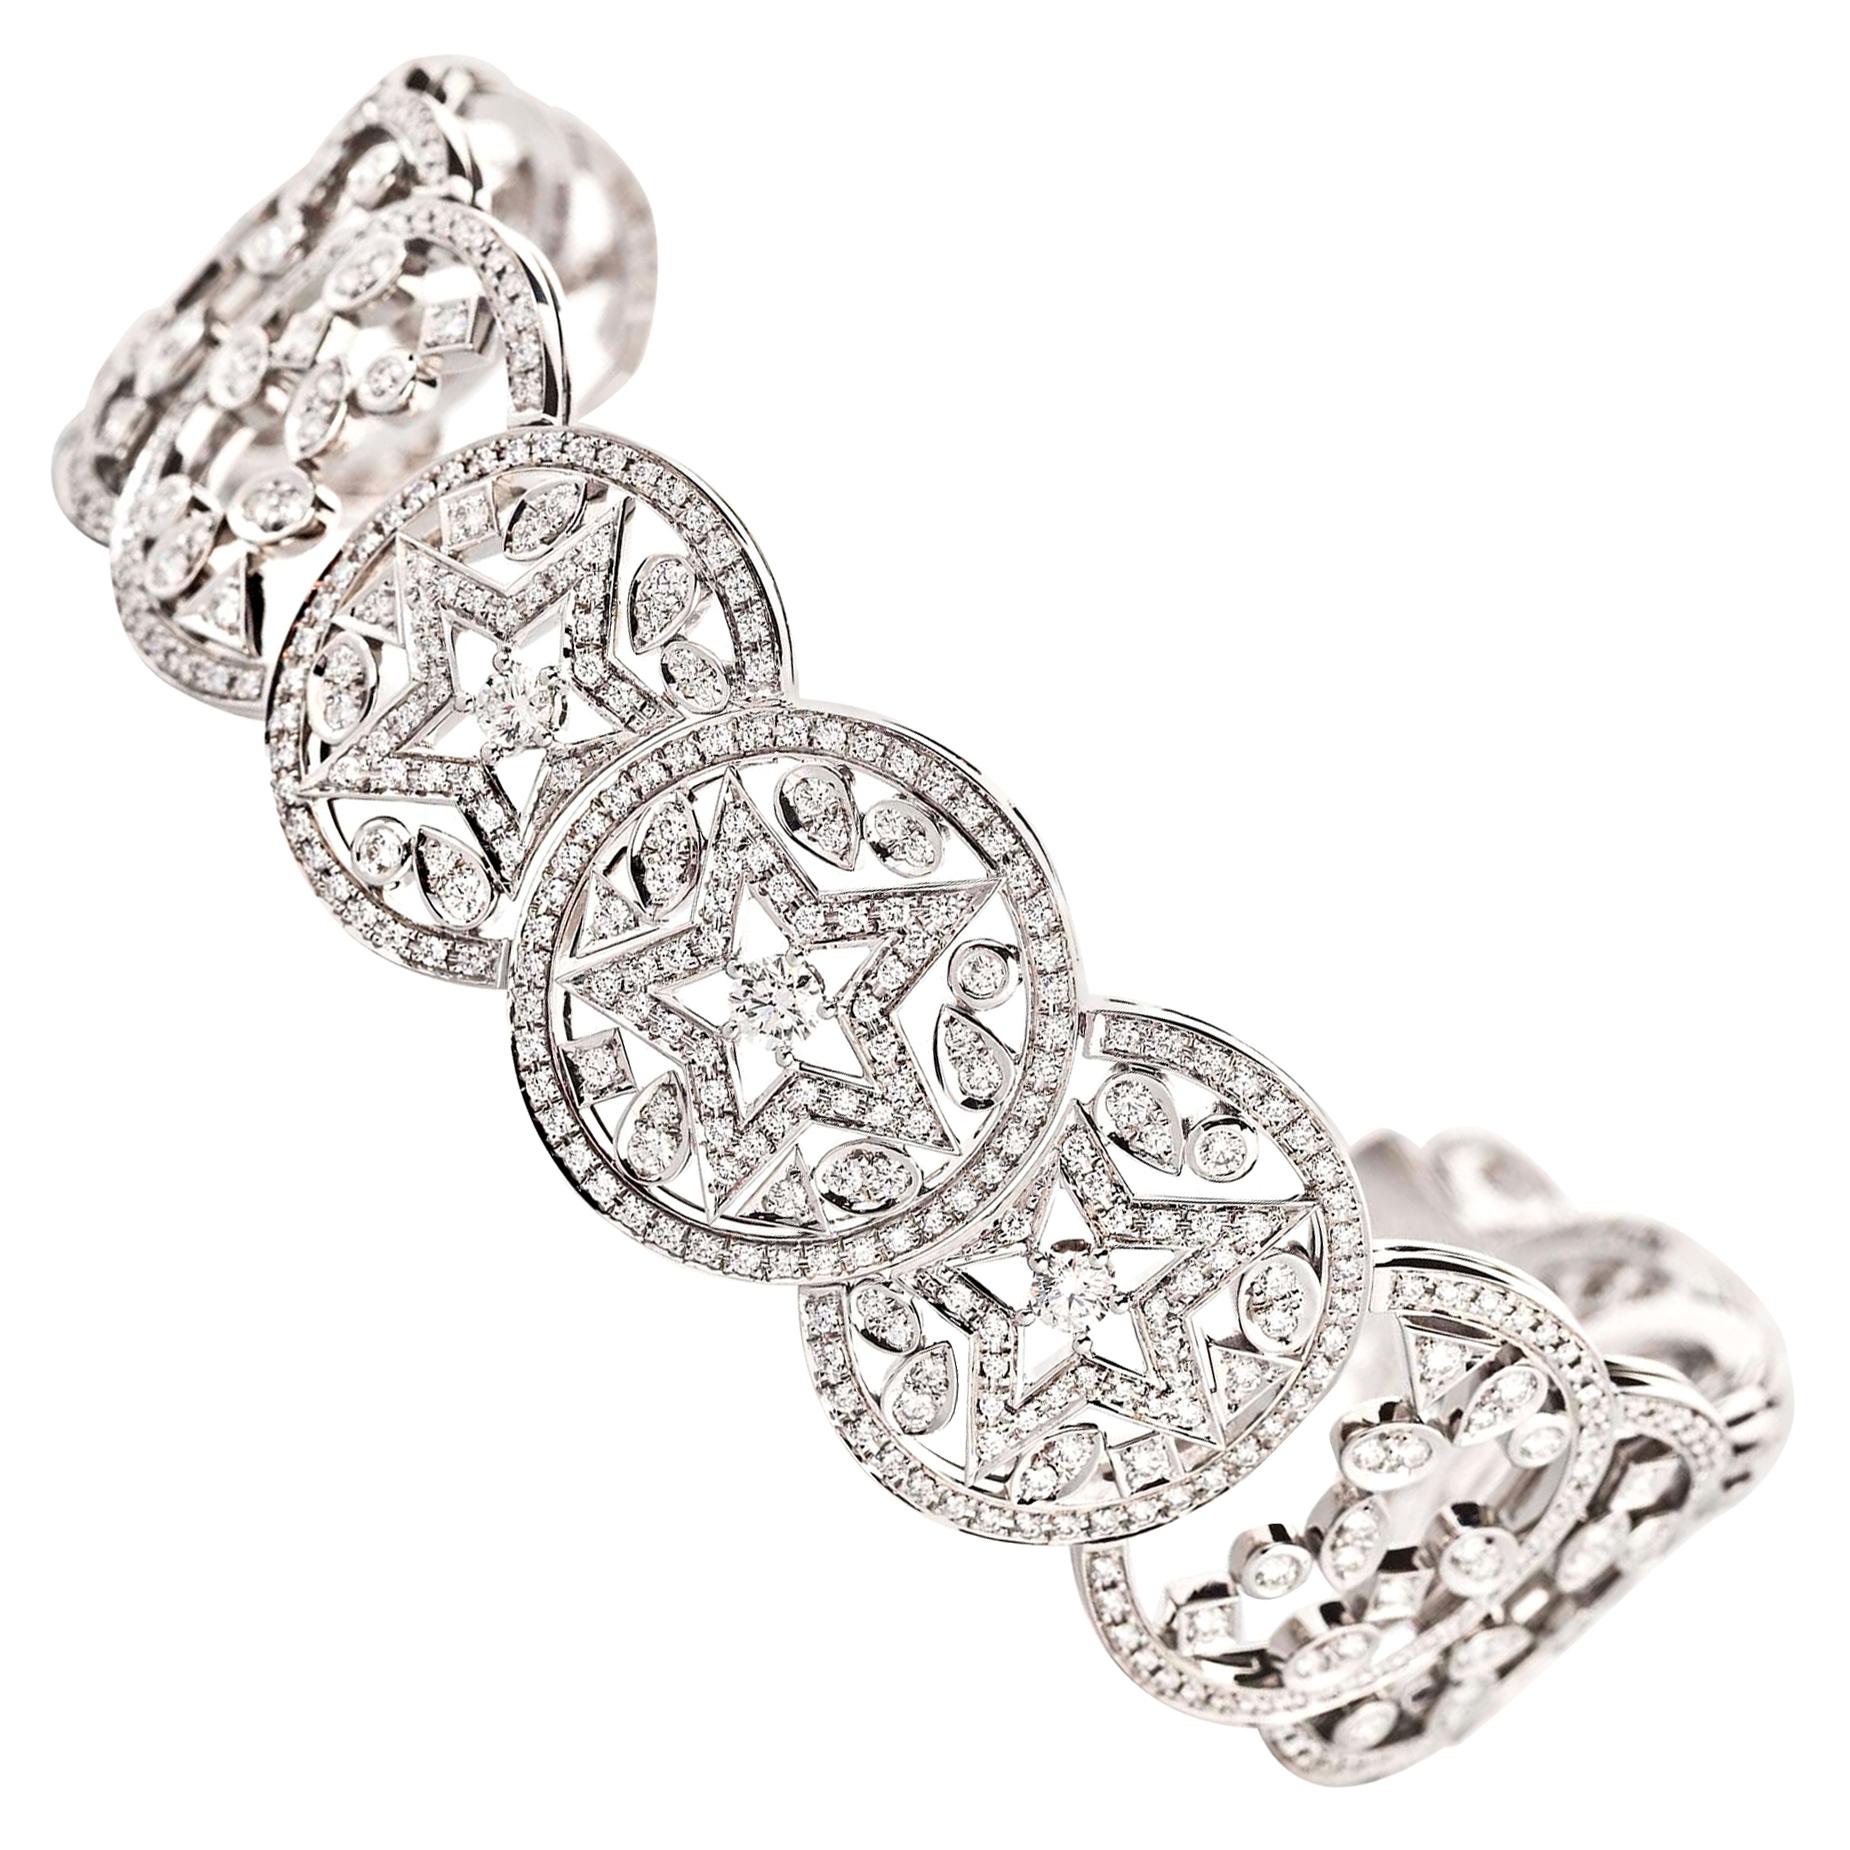 Art Deco Chanel High Jewelry White Gold and Diamond Bracelet, Les Intemporels Collection